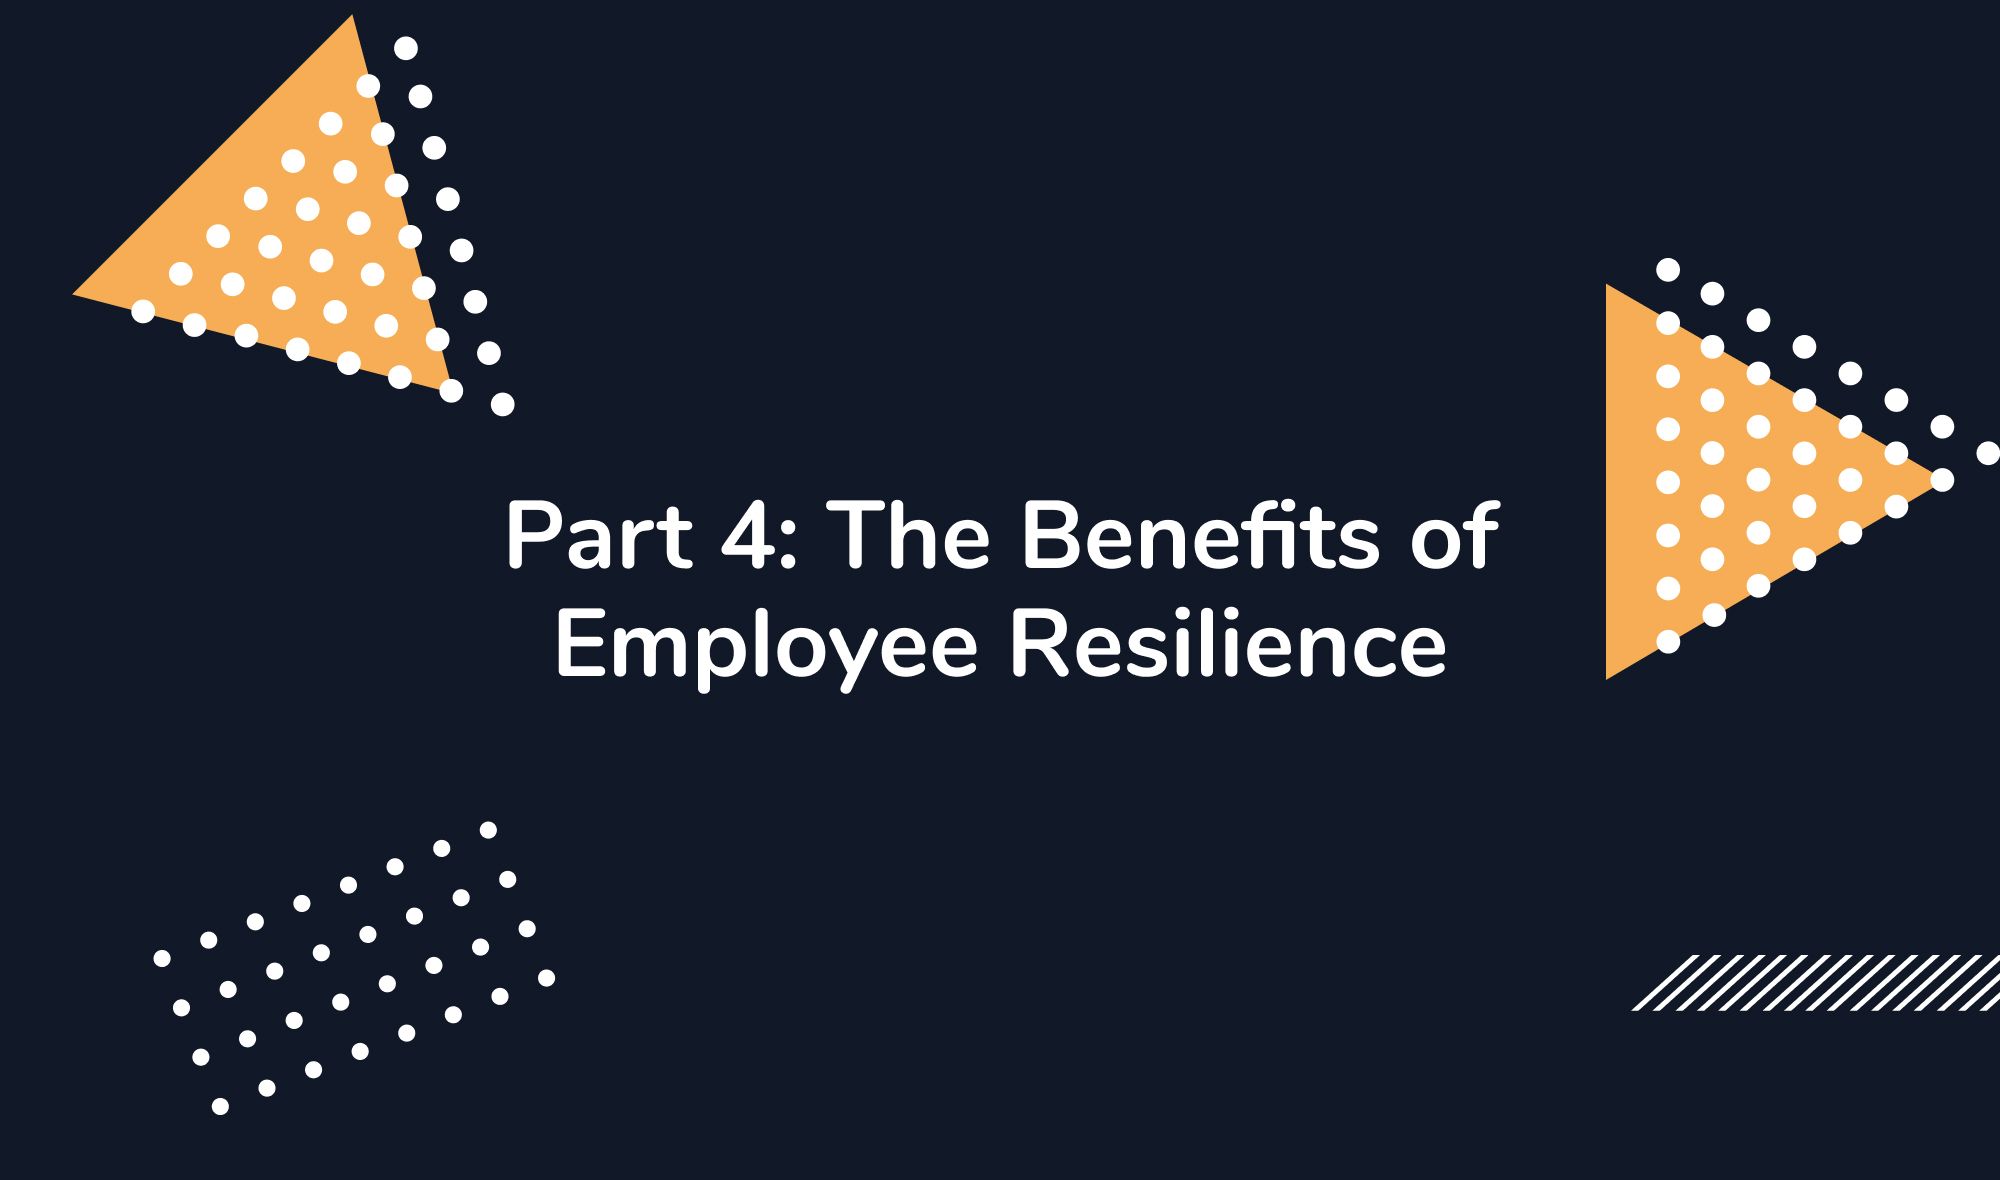 Part 4: The Benefits of Employee Resilience